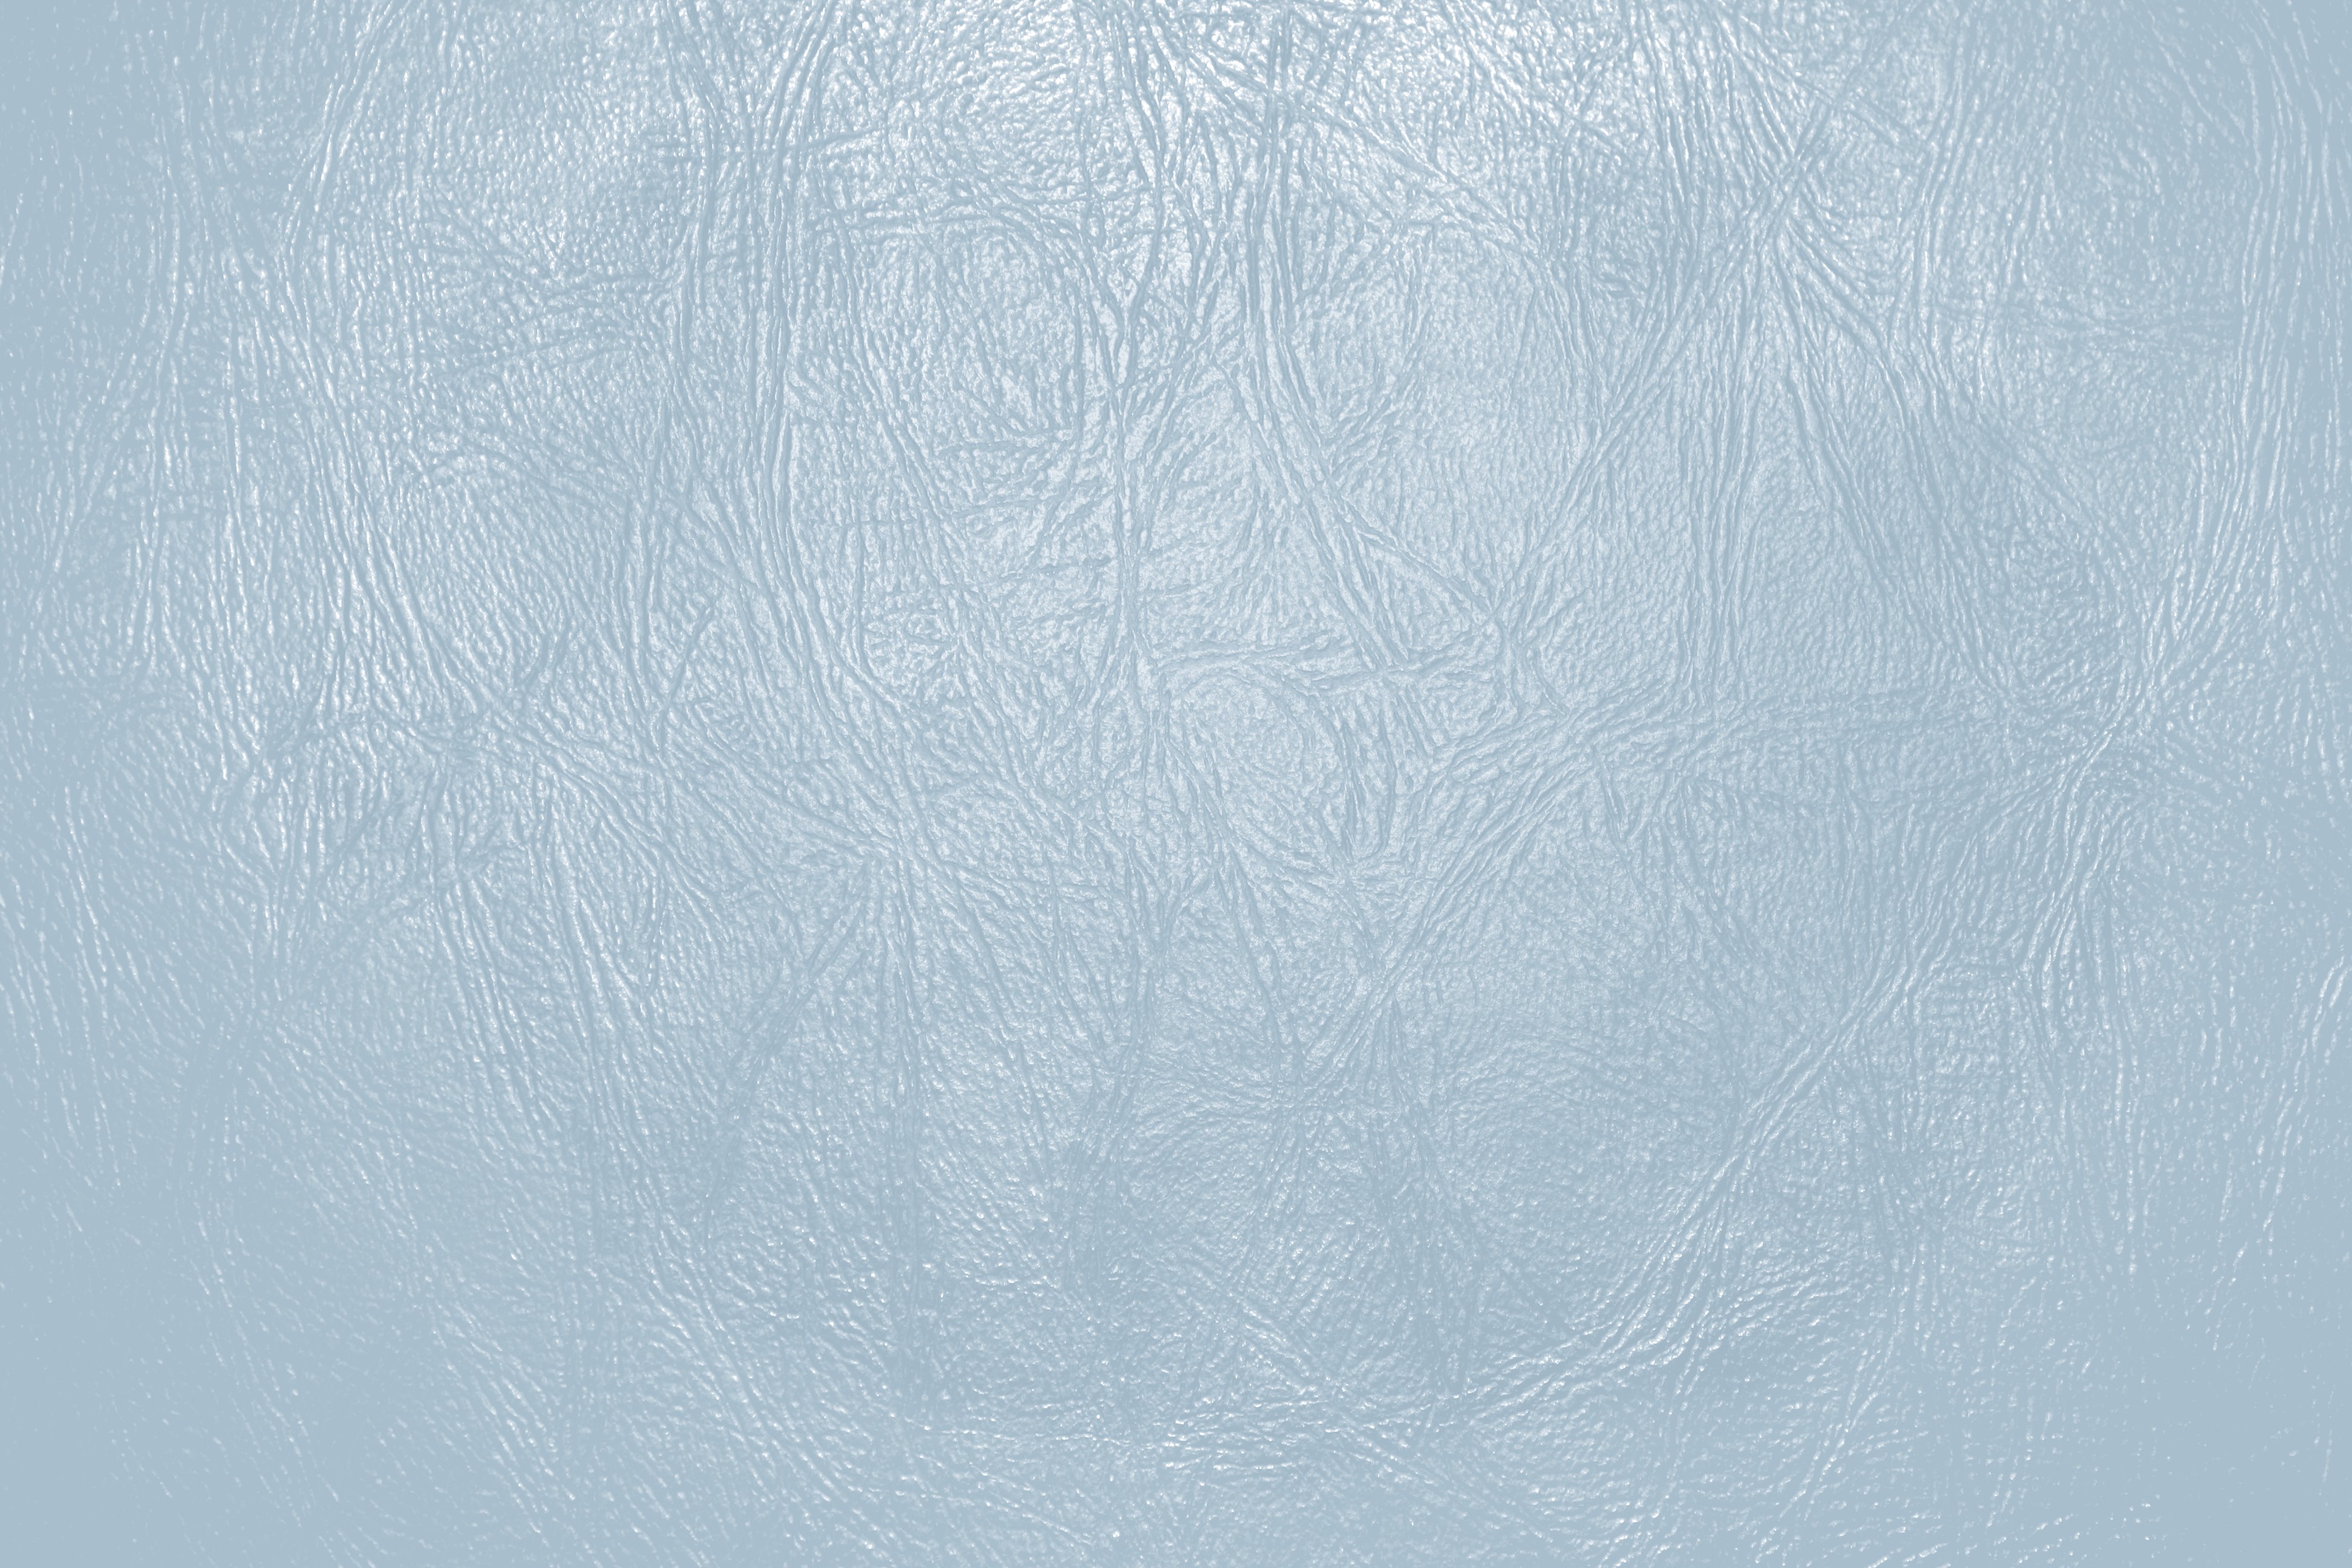 2480x3508 Gray-blue Solid Color Background